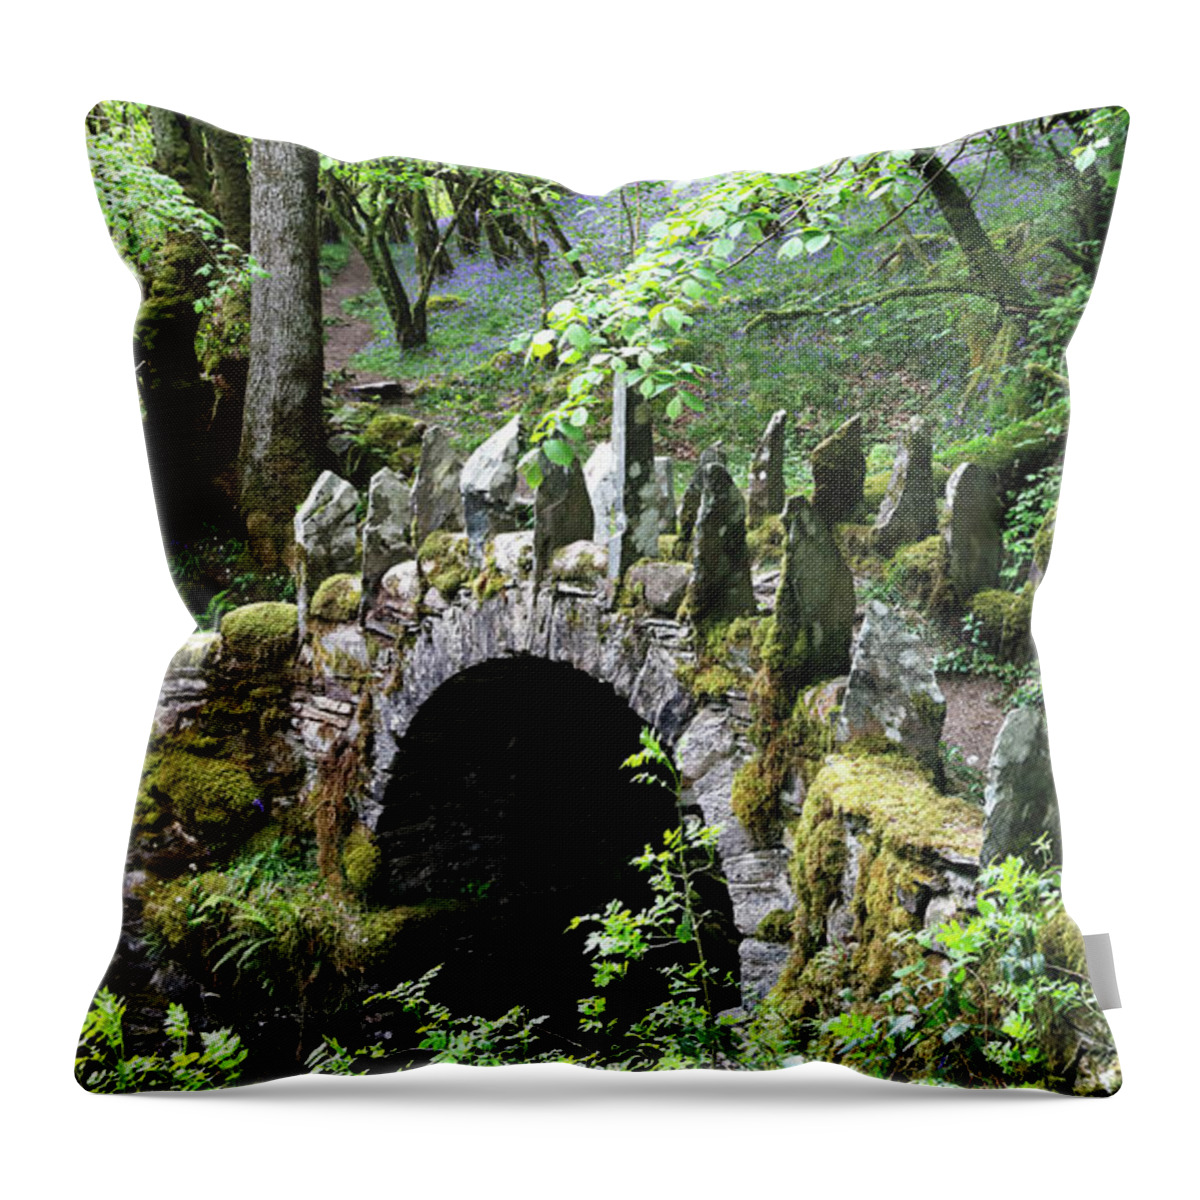 Faerie Bridge Throw Pillow featuring the photograph The Enchanted Forest by Nicholas Blackwell